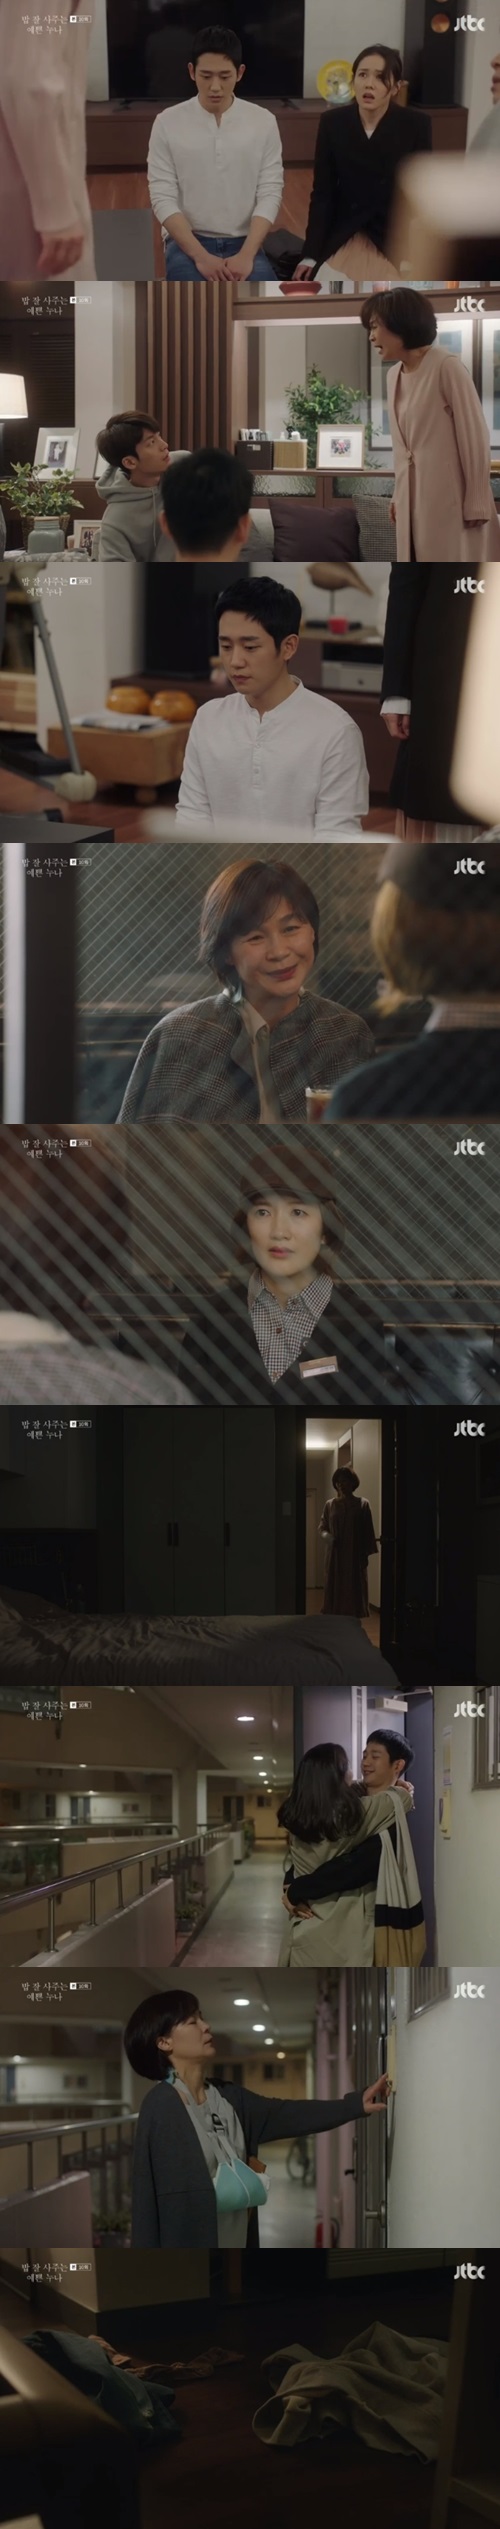 Hae-yoen Gil becomes bad mother as she blocks daughter Son Ye-jins loveKim Miyeon (Hae-yoen Gil) in the 10th episode of JTBCs gilt drama, Beautiful Sister Who Buys Bob Good (played by Kim Eun/director Ahn Pan-seok), which aired on April 28, vehemently opposed the love affair of her daughter, Yoon Jin-ah (Son Ye-jin).When Seo Jun-hee (Jeong Hae-in) and Yoon Jin-ah knelt down in turn, Kim Miyeon noticed the secret love of the two, but the reaction was unexpected.Kim Miyeon was angry at his son Yoon Seung-ho (who was a friend), saying, Did you know that? But then he took him into the room with anger, saying, Why are you playing games without studying to do that?A thorough disregard for the Seo Jun-hee.Yoon Jin-a was embarrassed and once he saw Seo Jun-hee, when Yun Jin-ah returned, Kim Miyeon hit his daughter with anger that Jun-hee is going to be a party.Kim Miyeon was hurt by his arm and found the emergency room that night.Yoon Jin-a had taken care of Kim Miyeon, who had been treated by Seo Jun-hee, but Kim Miyeon was still cold.Kim Miyeon said her husband, Yoon Sang (Oman Seok), What is wrong with meeting Junhee?I was the last to know, he said, and when he responded insignificantly, he kicked him out of his room.Yoon Sang, like Kim Miyeon, was also opposed to the relationship between Yun Jin-a and Seo Jun-hee, he said.Kim Miyeon met Seo Jun-hee sister Seo Kyung-sun (played by Jang So-yeon) separately and laughed, I did not win it, but I think they are doing well and doing things well.Yes, youre not a cloudy kid, but its strange, he said. Jun-hee still needs to be ironed out and held up.I thought you said that you would be responsible for Jun-hees life properly. Seo Kyung-sun, who has really regarded Kim Miyeon as a mother for a while, quietly shed tears when he heard Kim Miyeons words quietly because there was no other refutation.While Seo Kyung-sun was tearing, Kim Miyeon was angry, saying, Where is your mouth? And to her daughter, Yun Jin-a, she was asked to see the confrontation on the weekend.Yoon Jin-ah did not listen to it as horrifyingly childish.